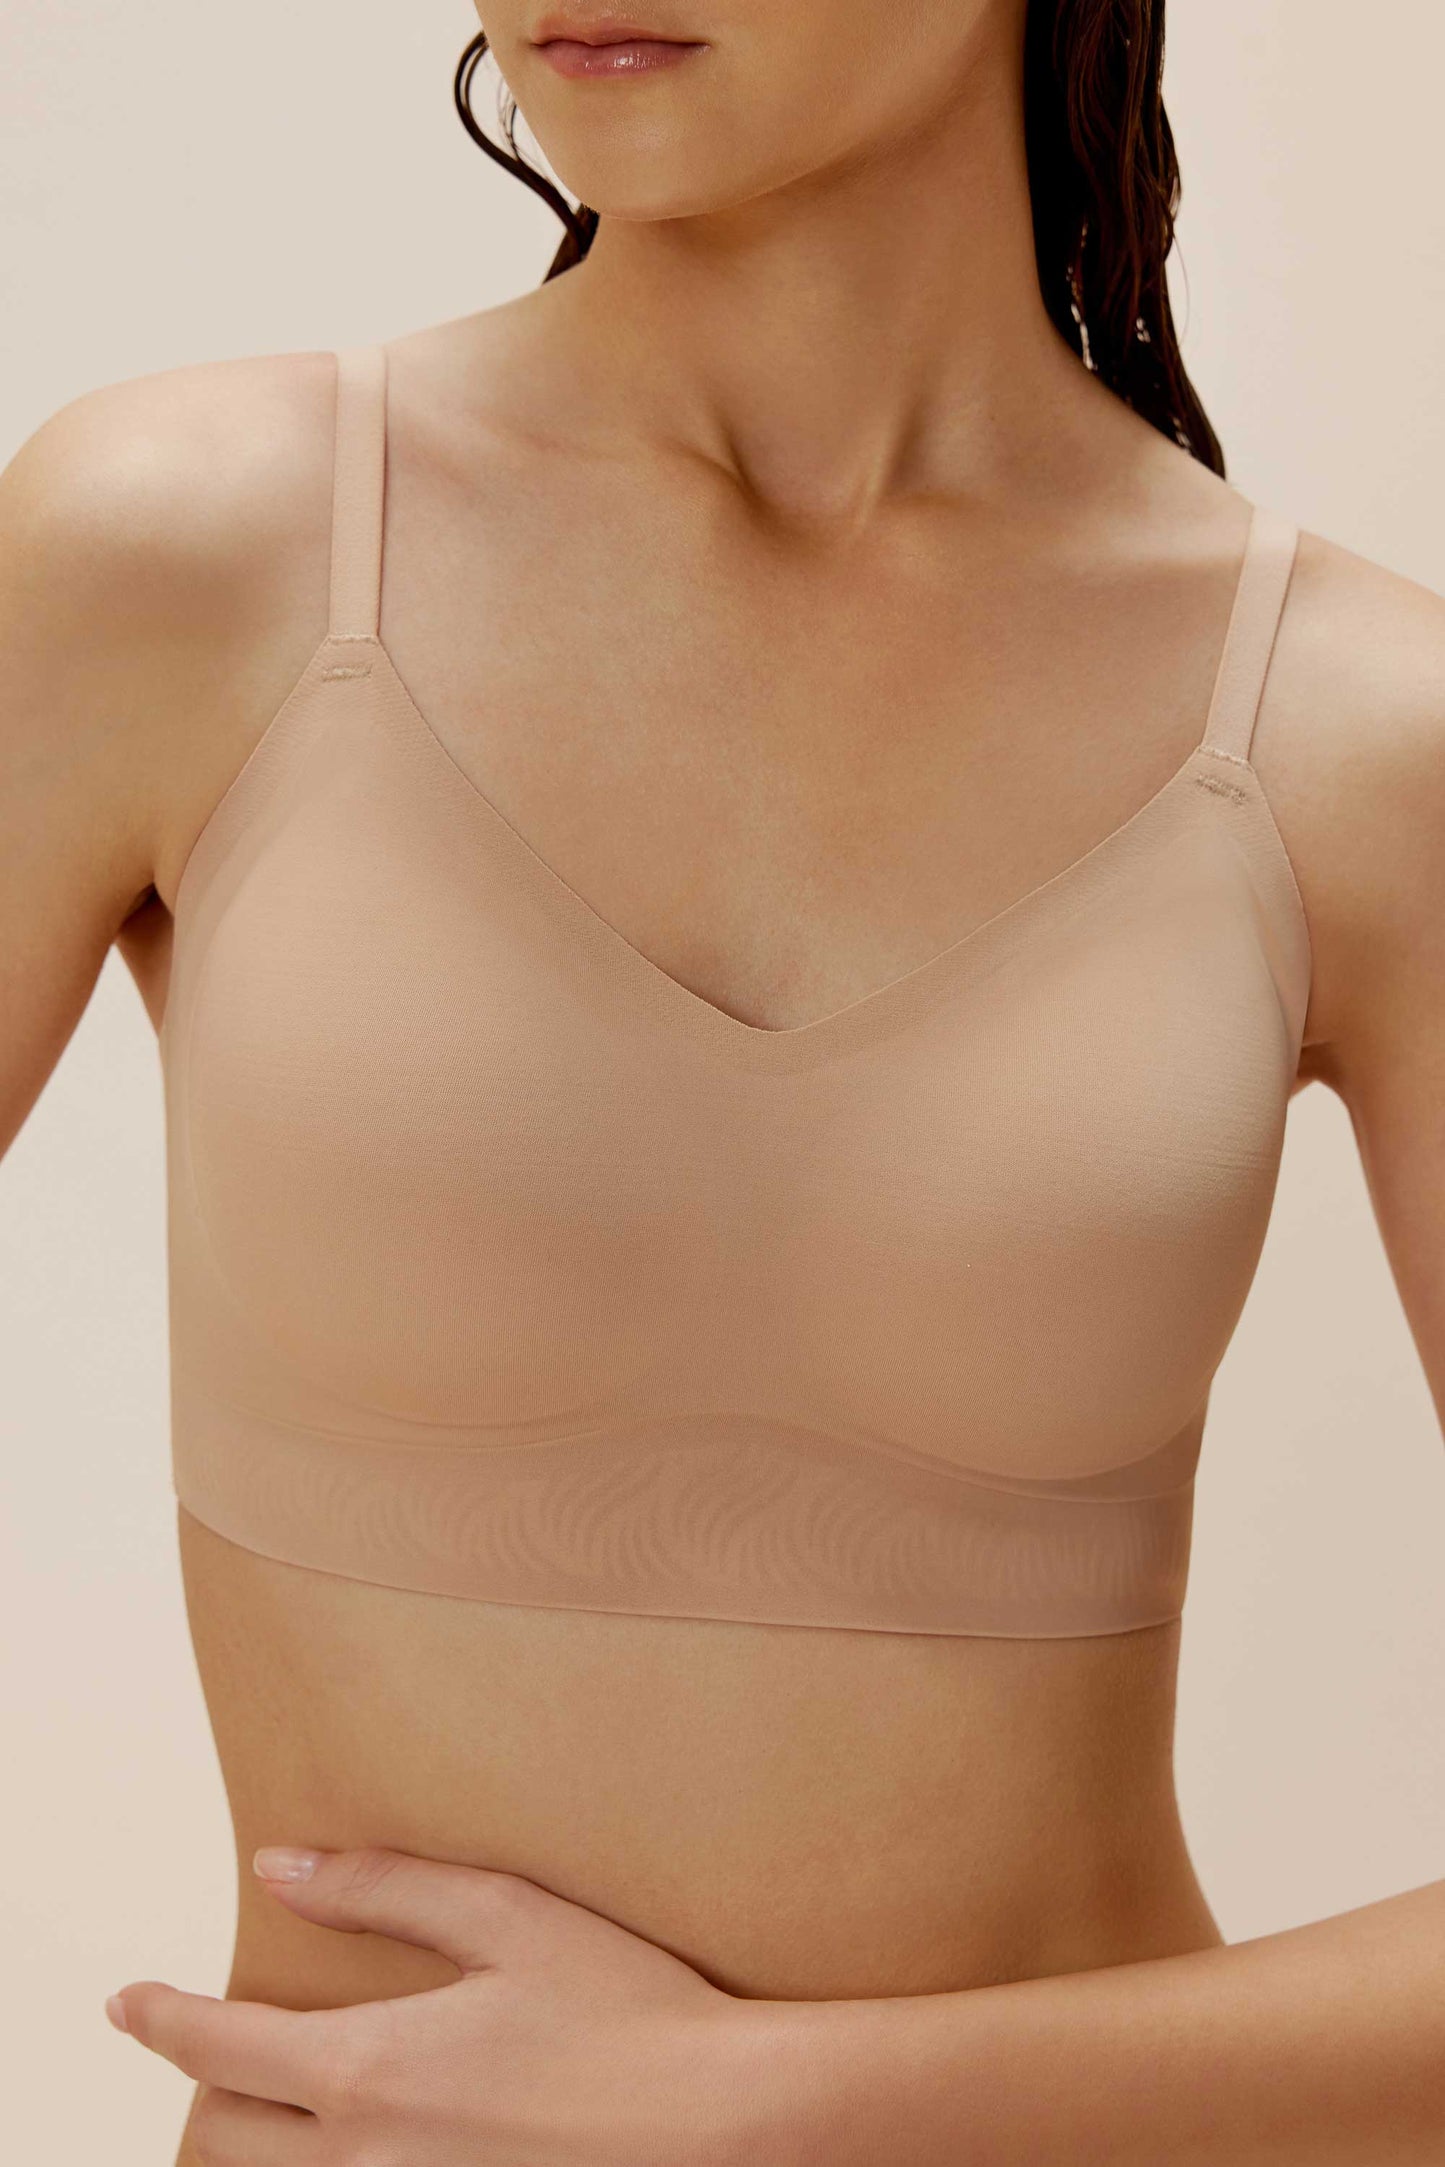 front close look of a woman wearing nude color bra